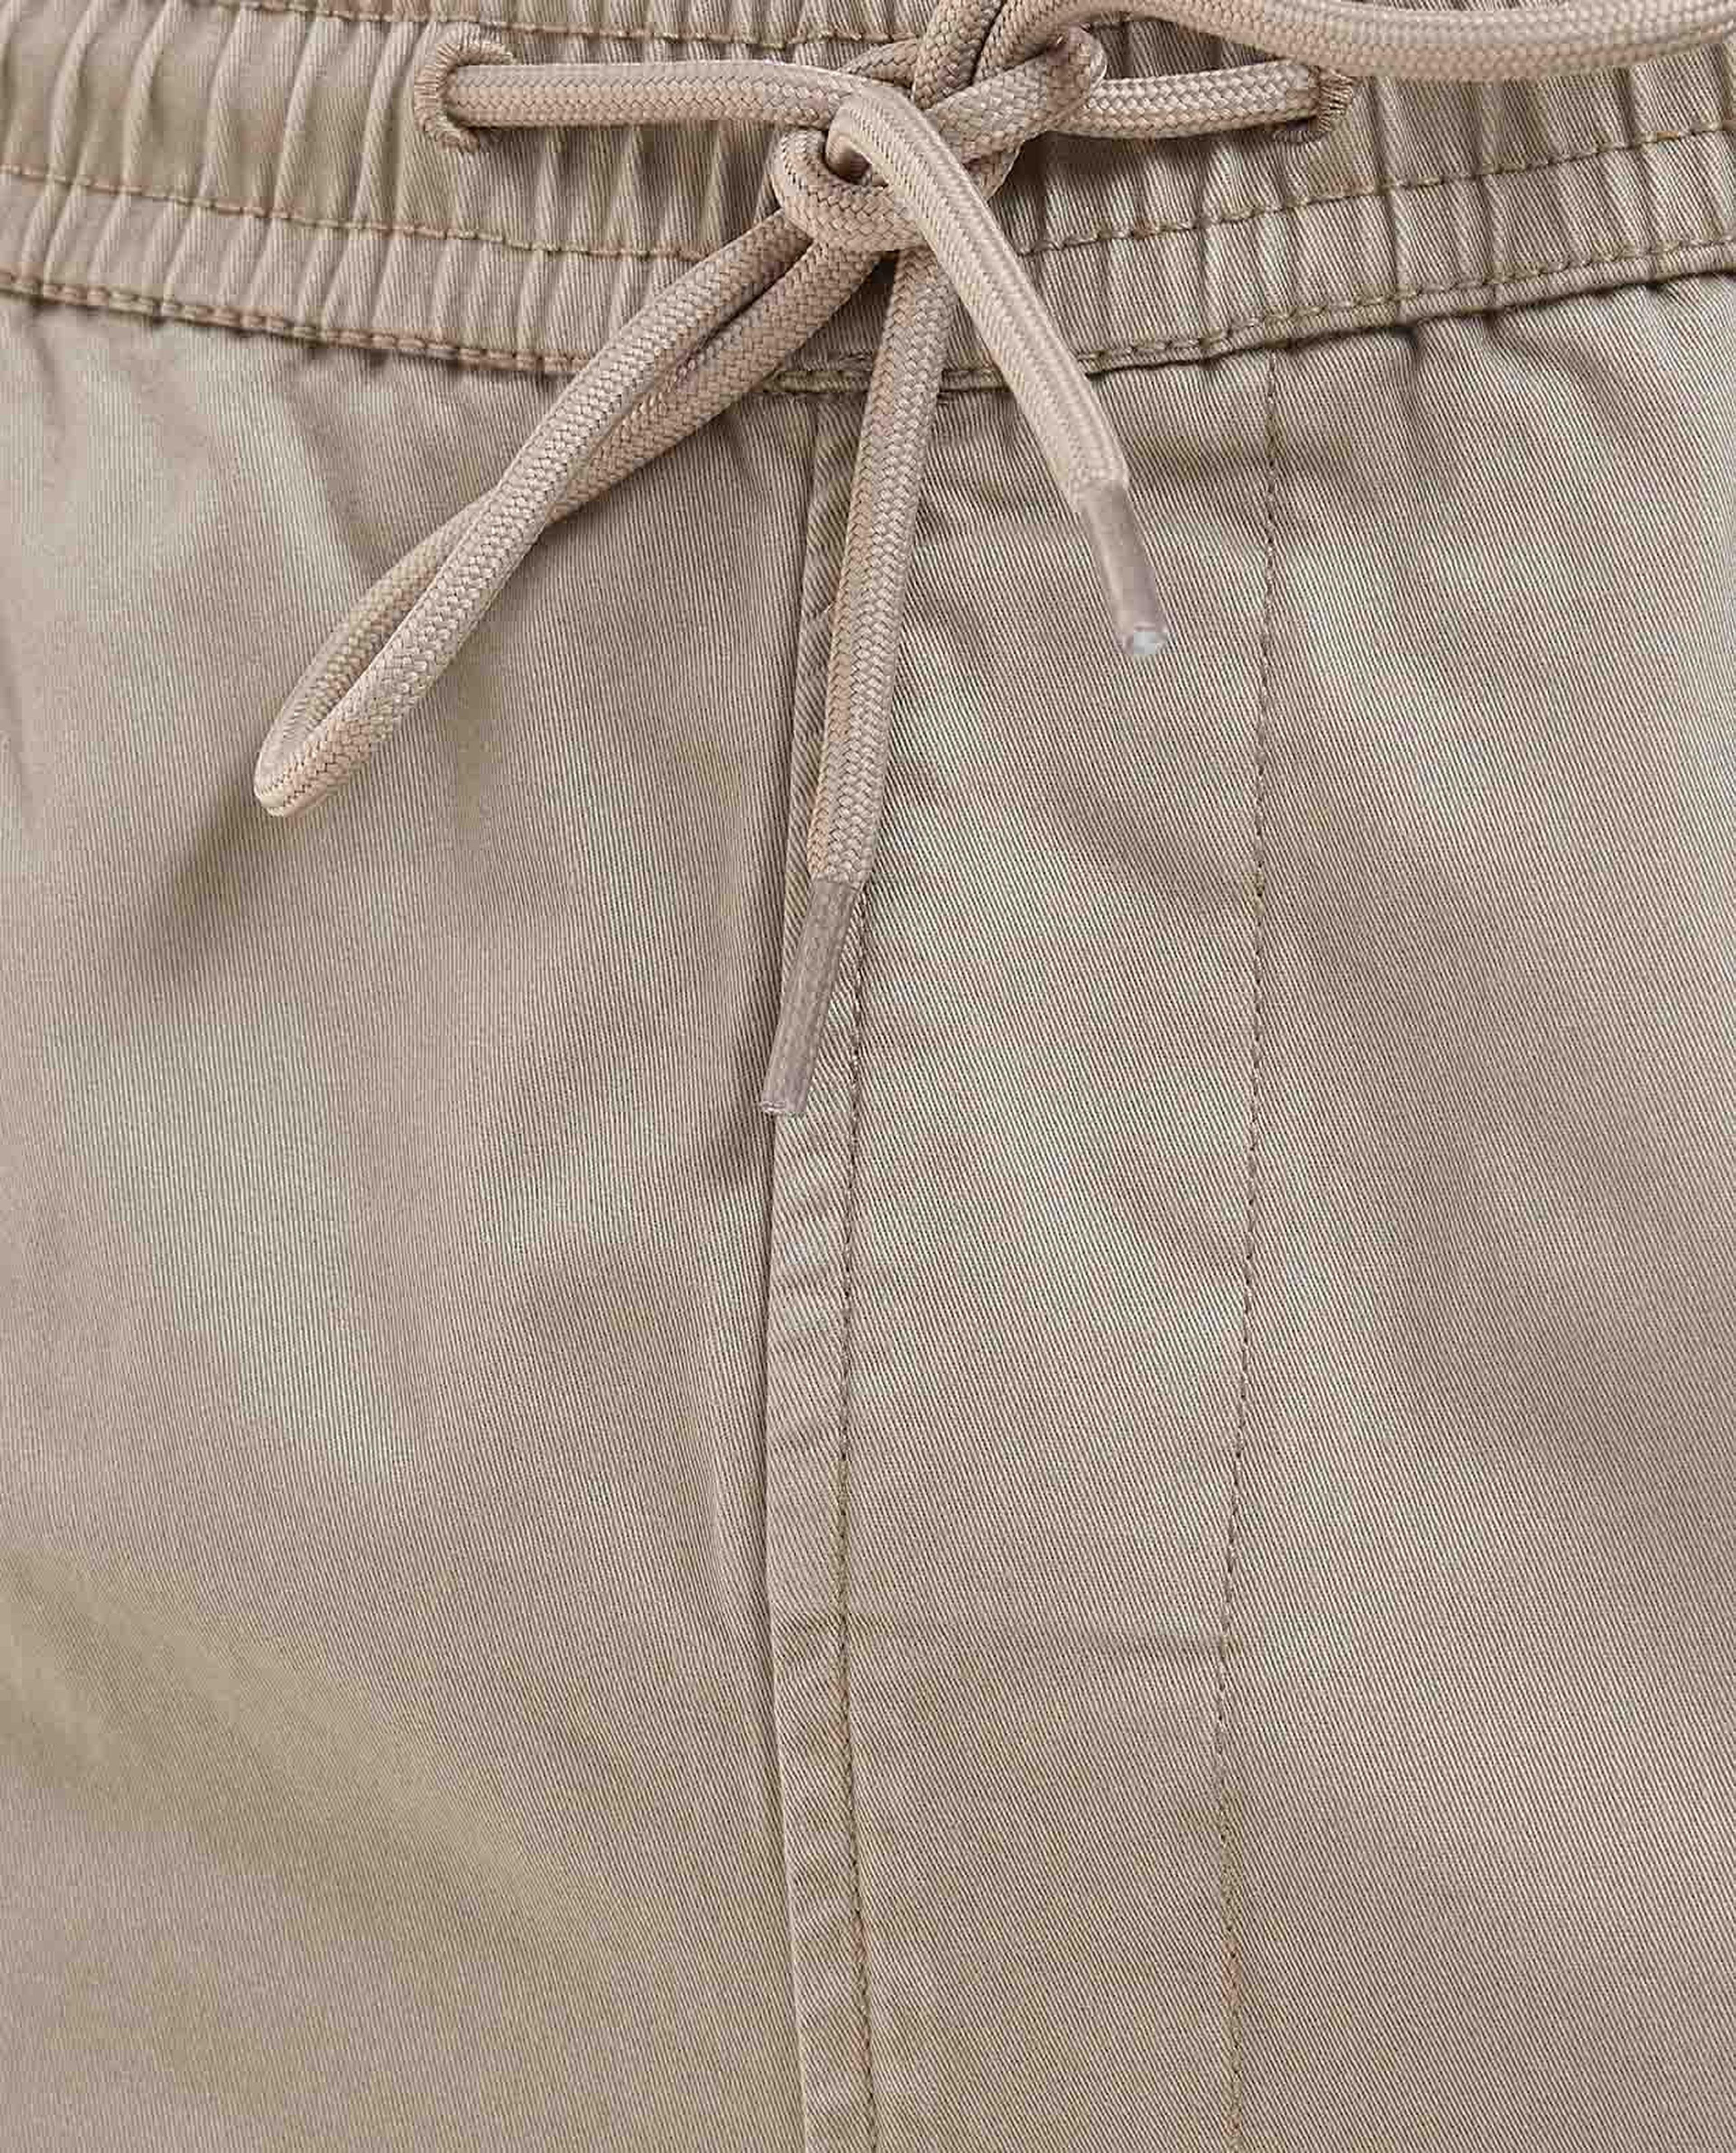 Solid Cargo Jogger Pants with Drawstring Waist